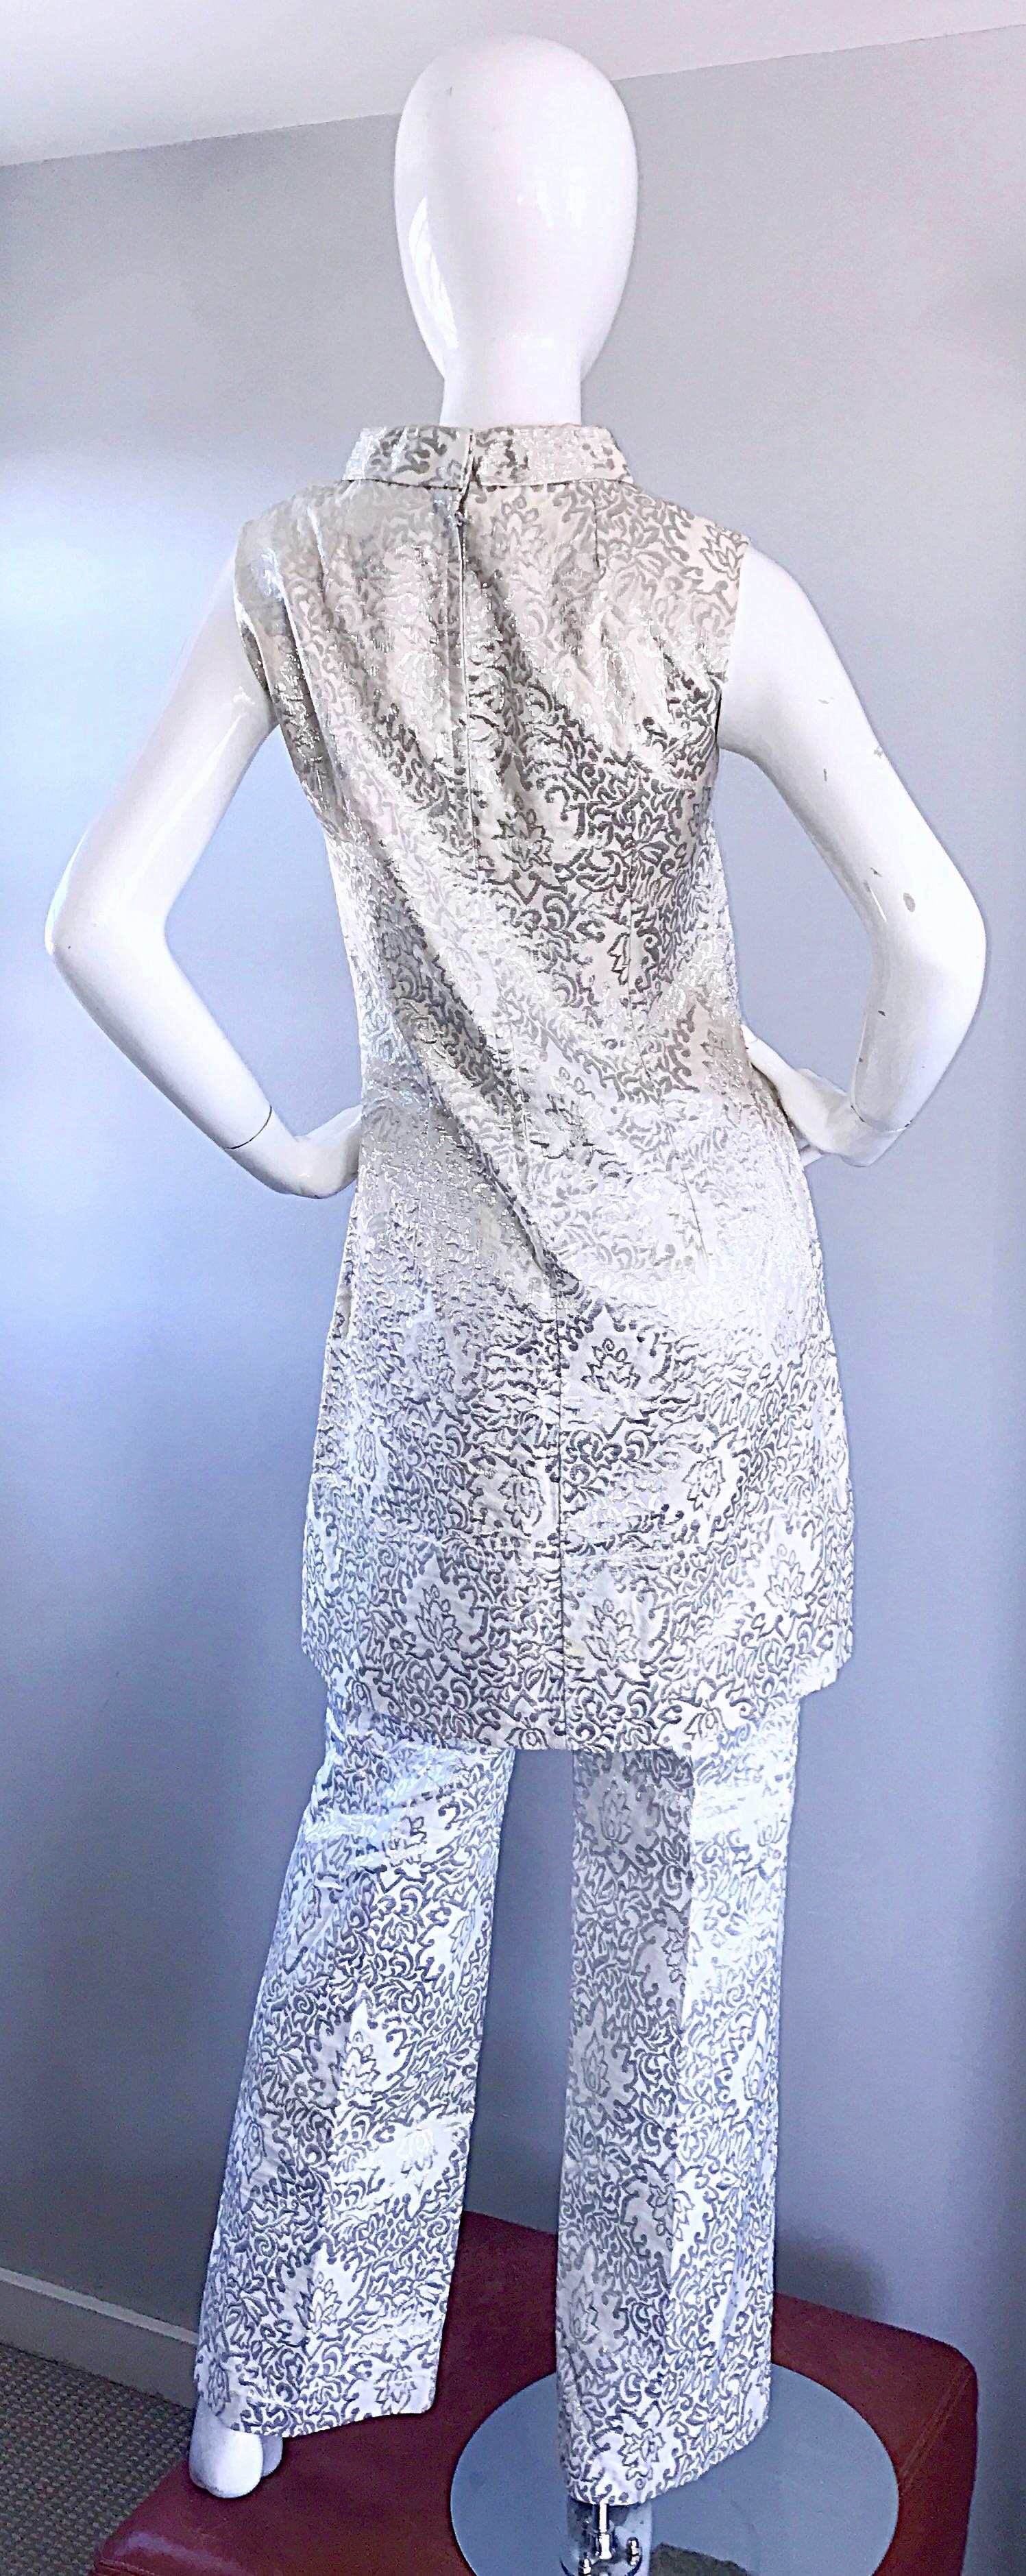 Women's 1960s Silver and White Silk Jacquard Metallic Vintage 60s Tunic Dress and Pants